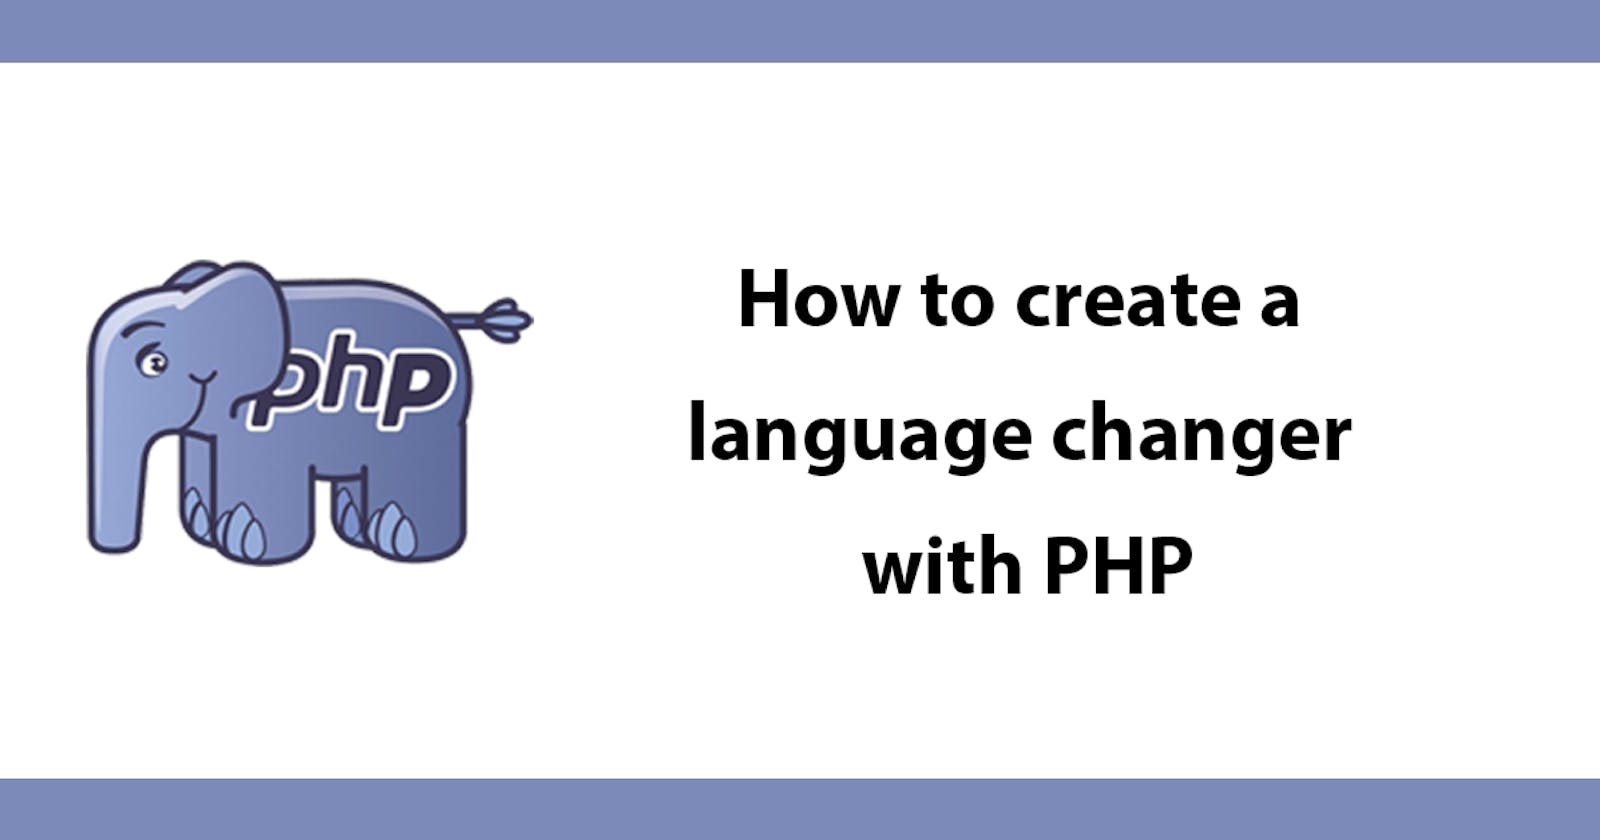 How to create a language changer with PHP